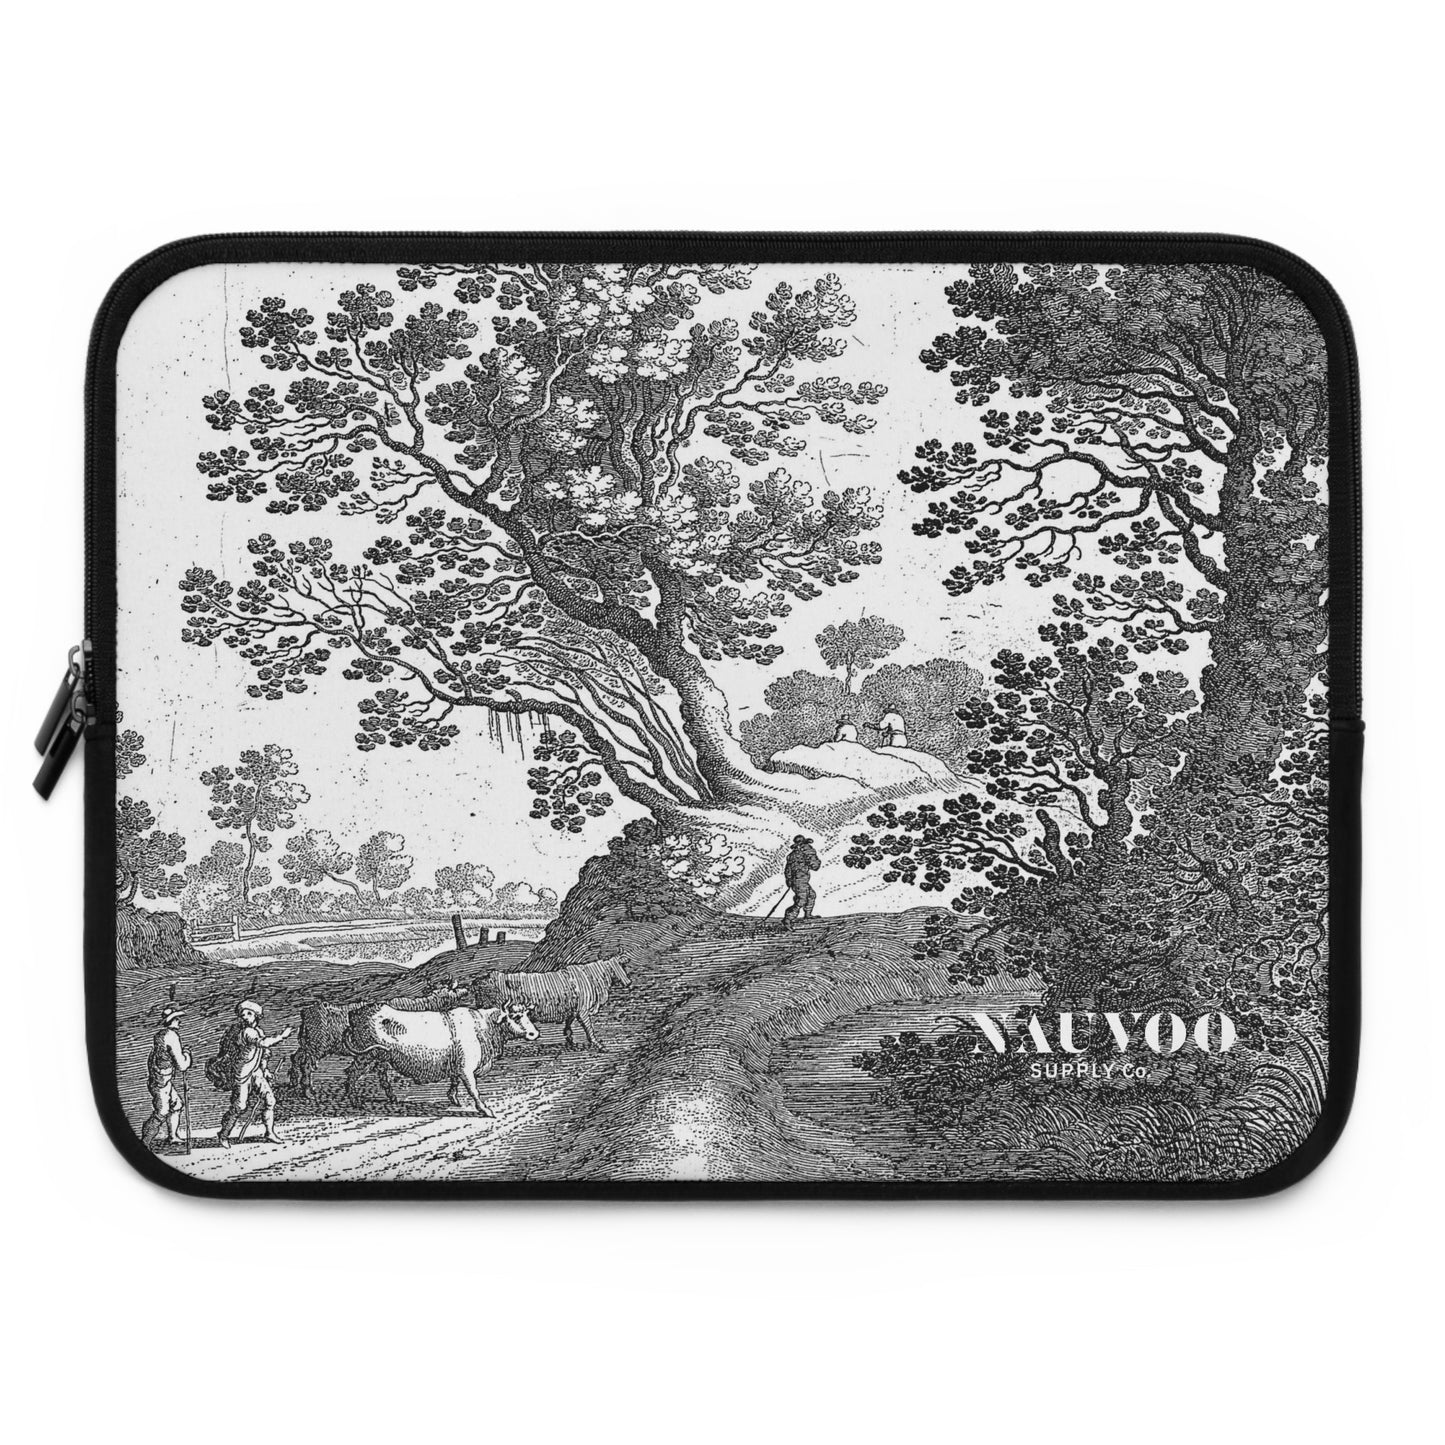 Nauvoo Supply Co Winter White Laptop and Tablet Sleeve